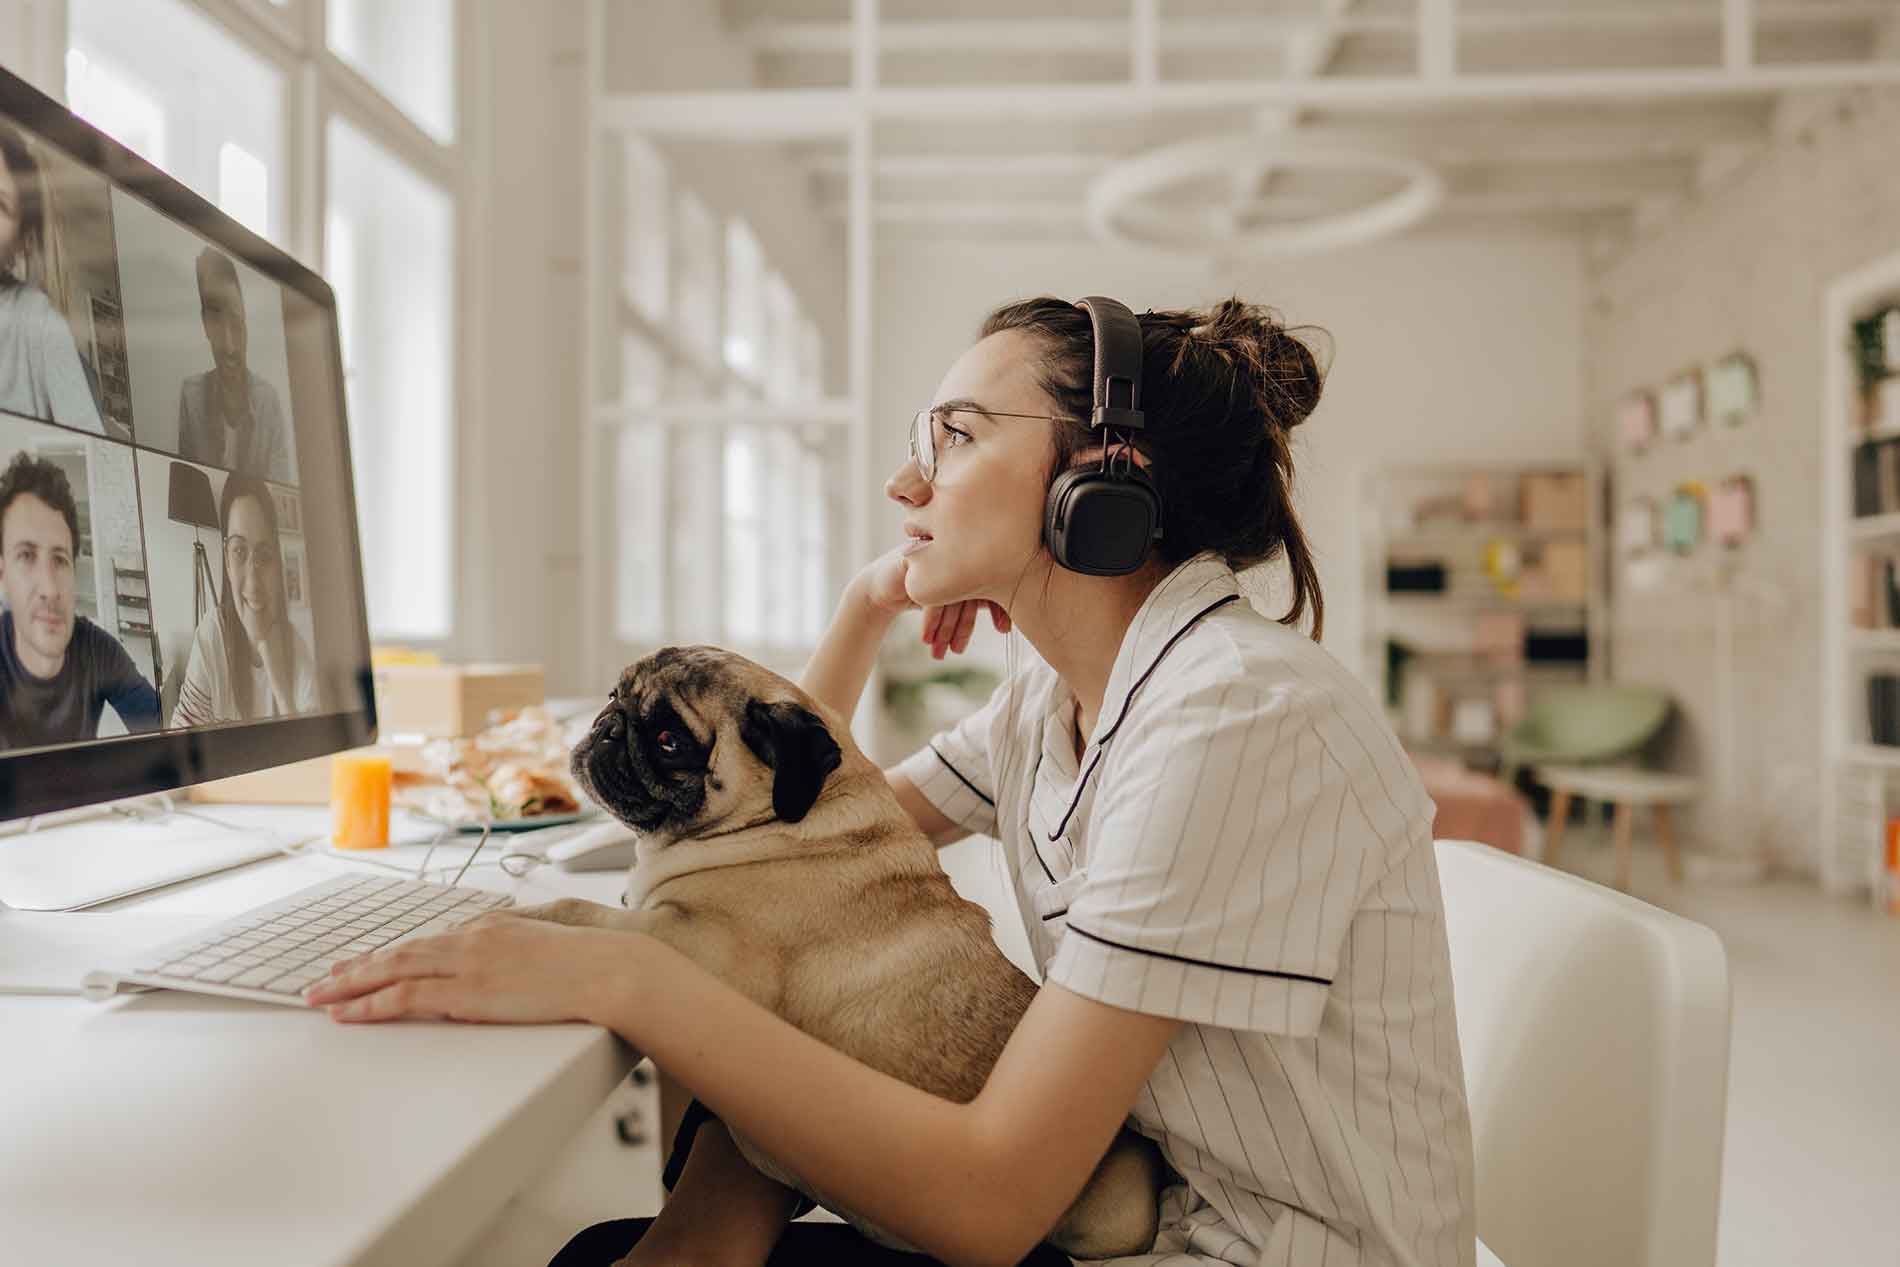 Nurse with dog at computer